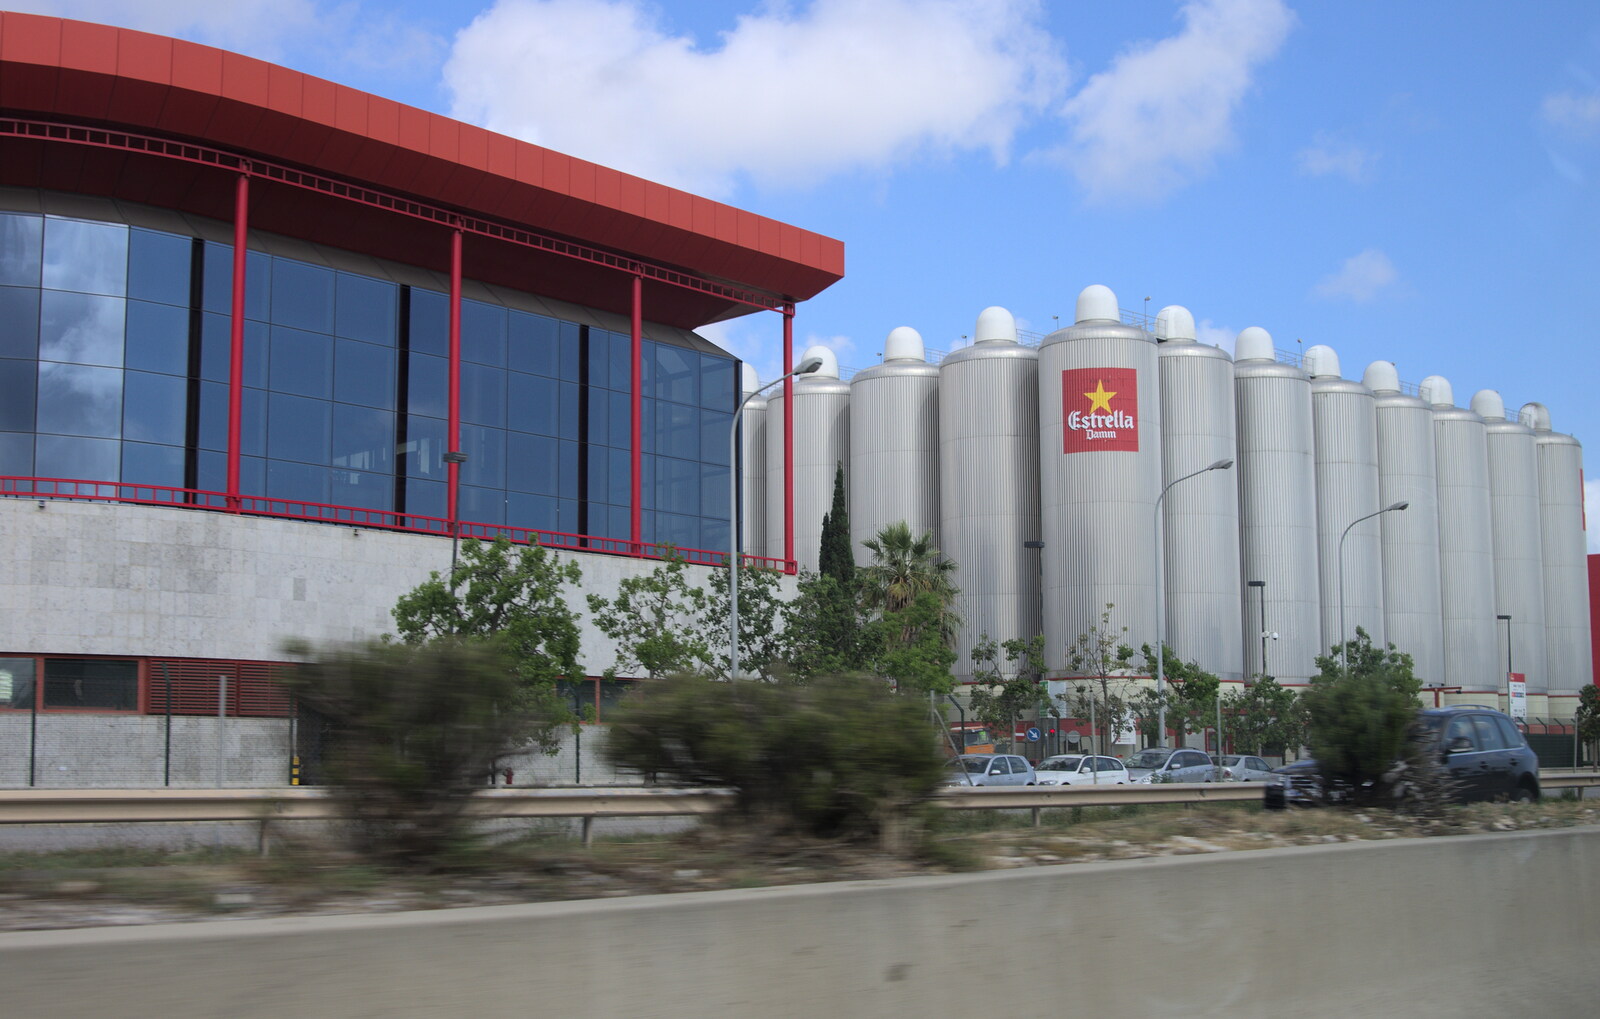 Near the airport, it's the Estralla Damm brewery from The Open Education Challenge, Barcelona, Catalonia - 13th July 2014